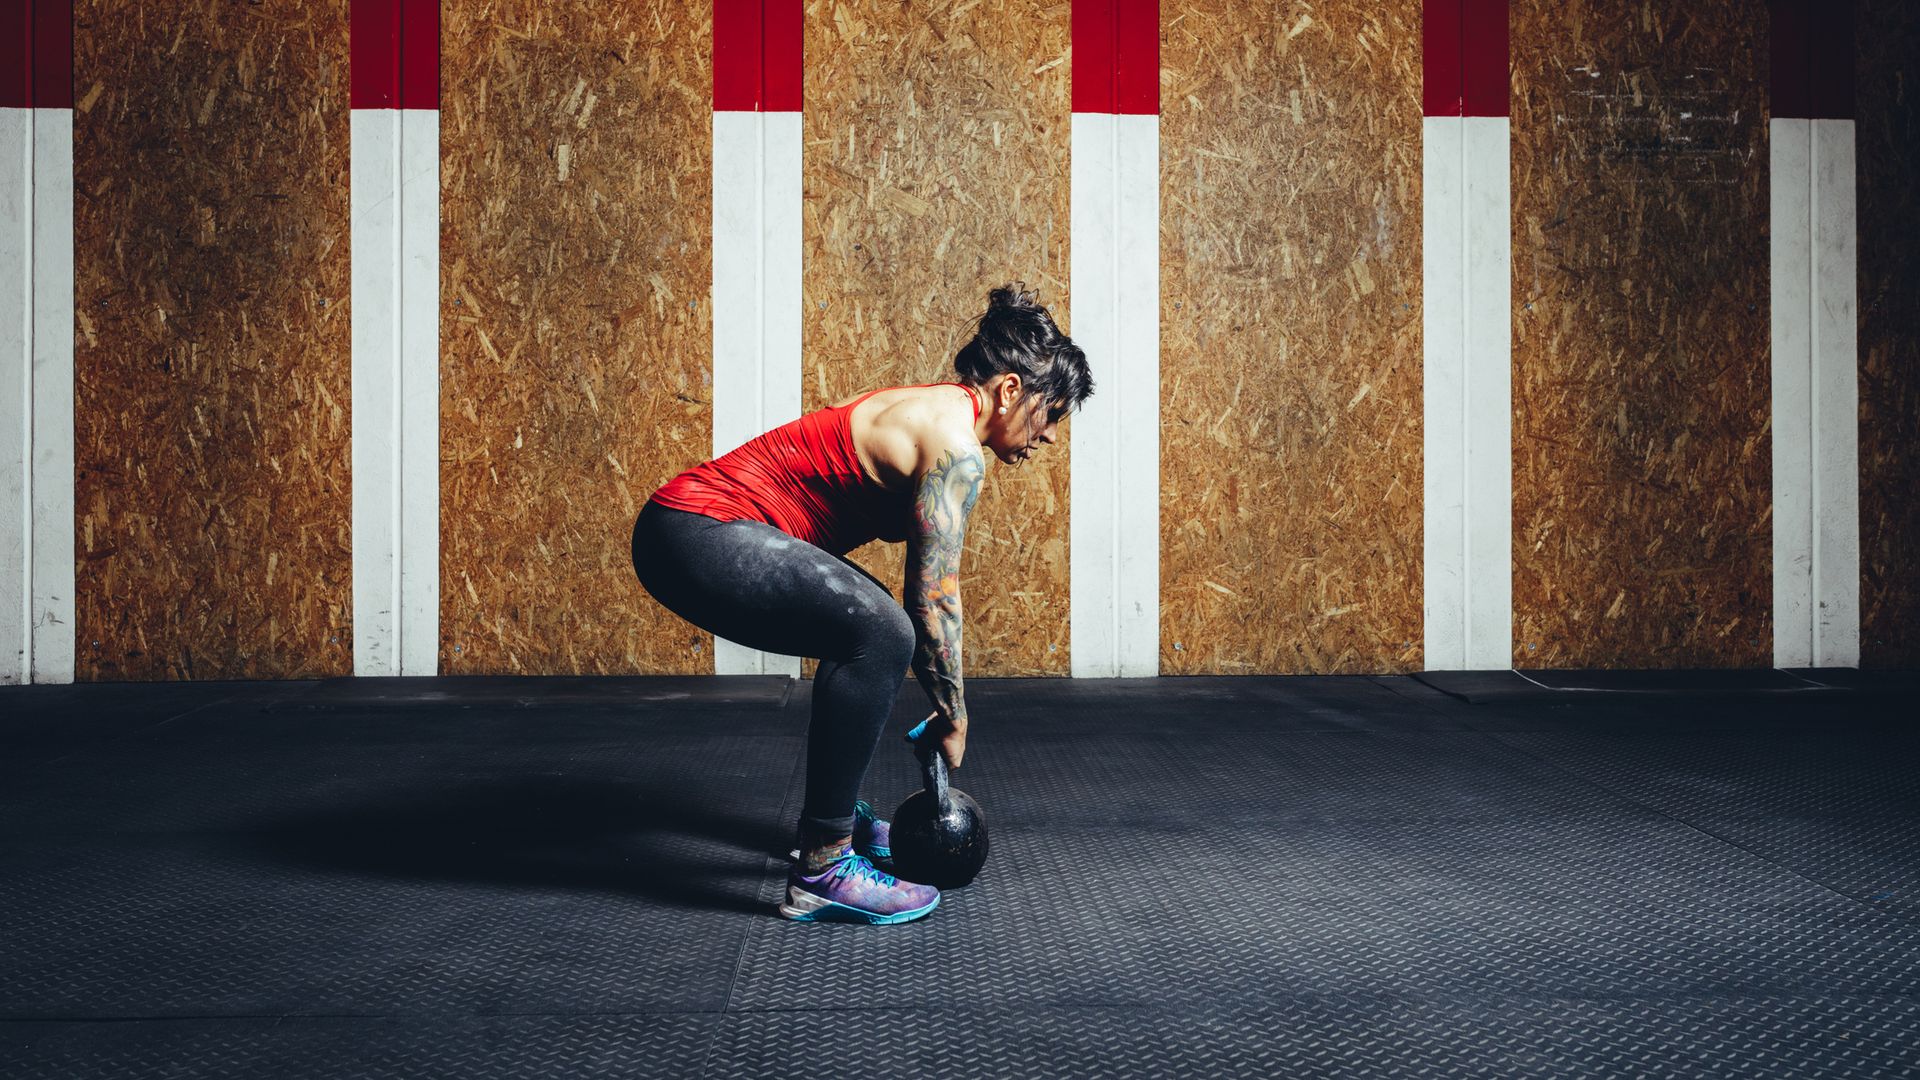 this expert pt recommends kettlebell training for strength, power and cardio gains—and these are the six exercises to master first